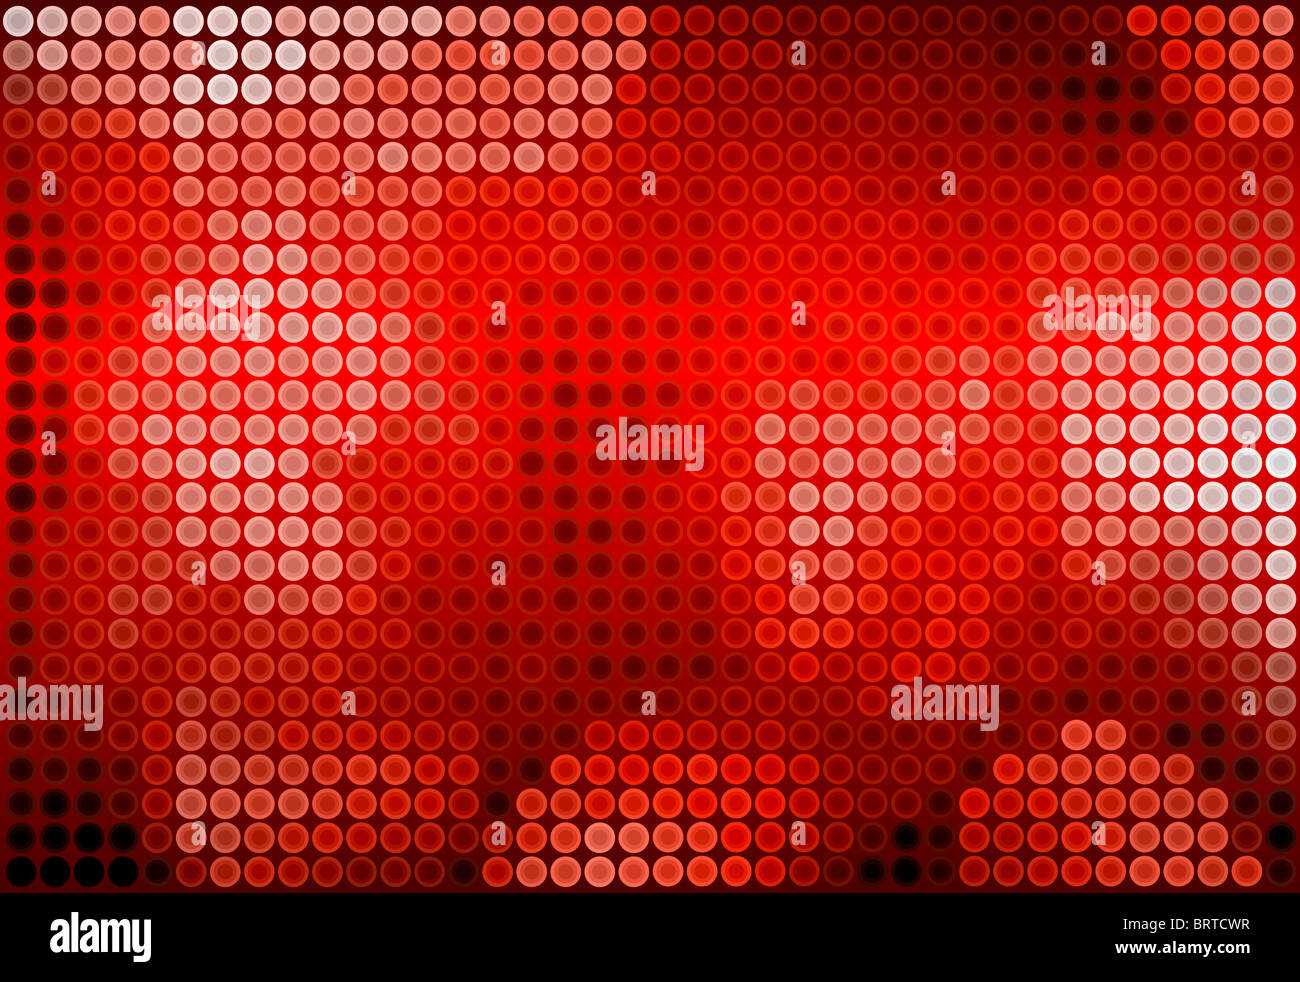 Abstract illustrated  background of red dots Stock Photo